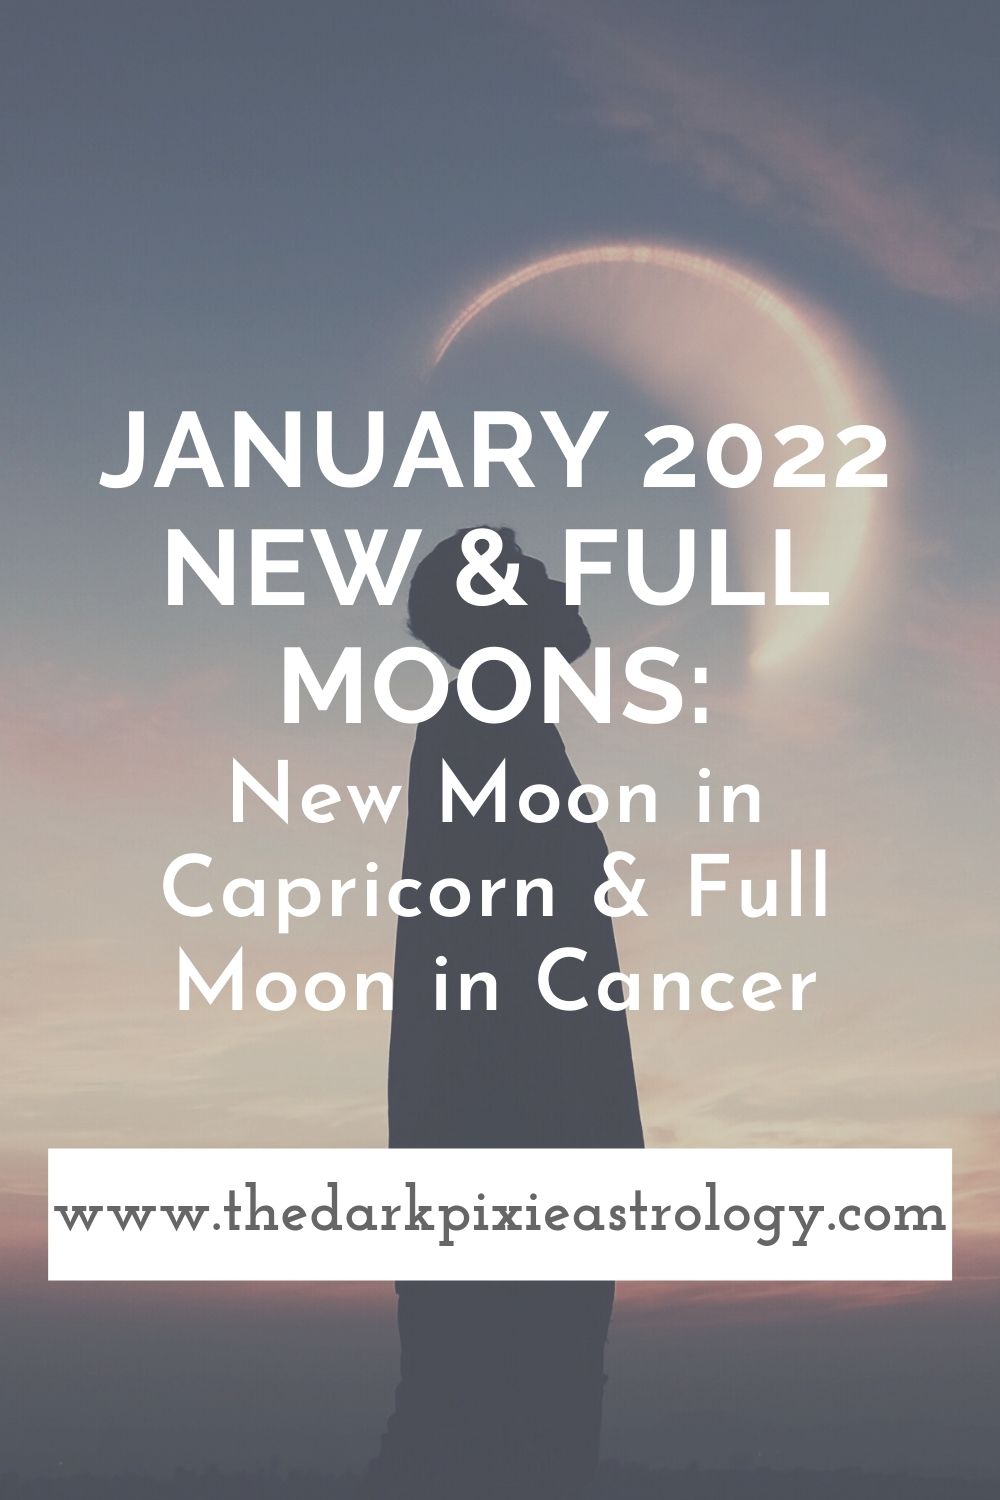 January 2022 New & Full Moons: New Moon in Capricorn & Full Moon in Cancer - The Dark Pixie Astrology